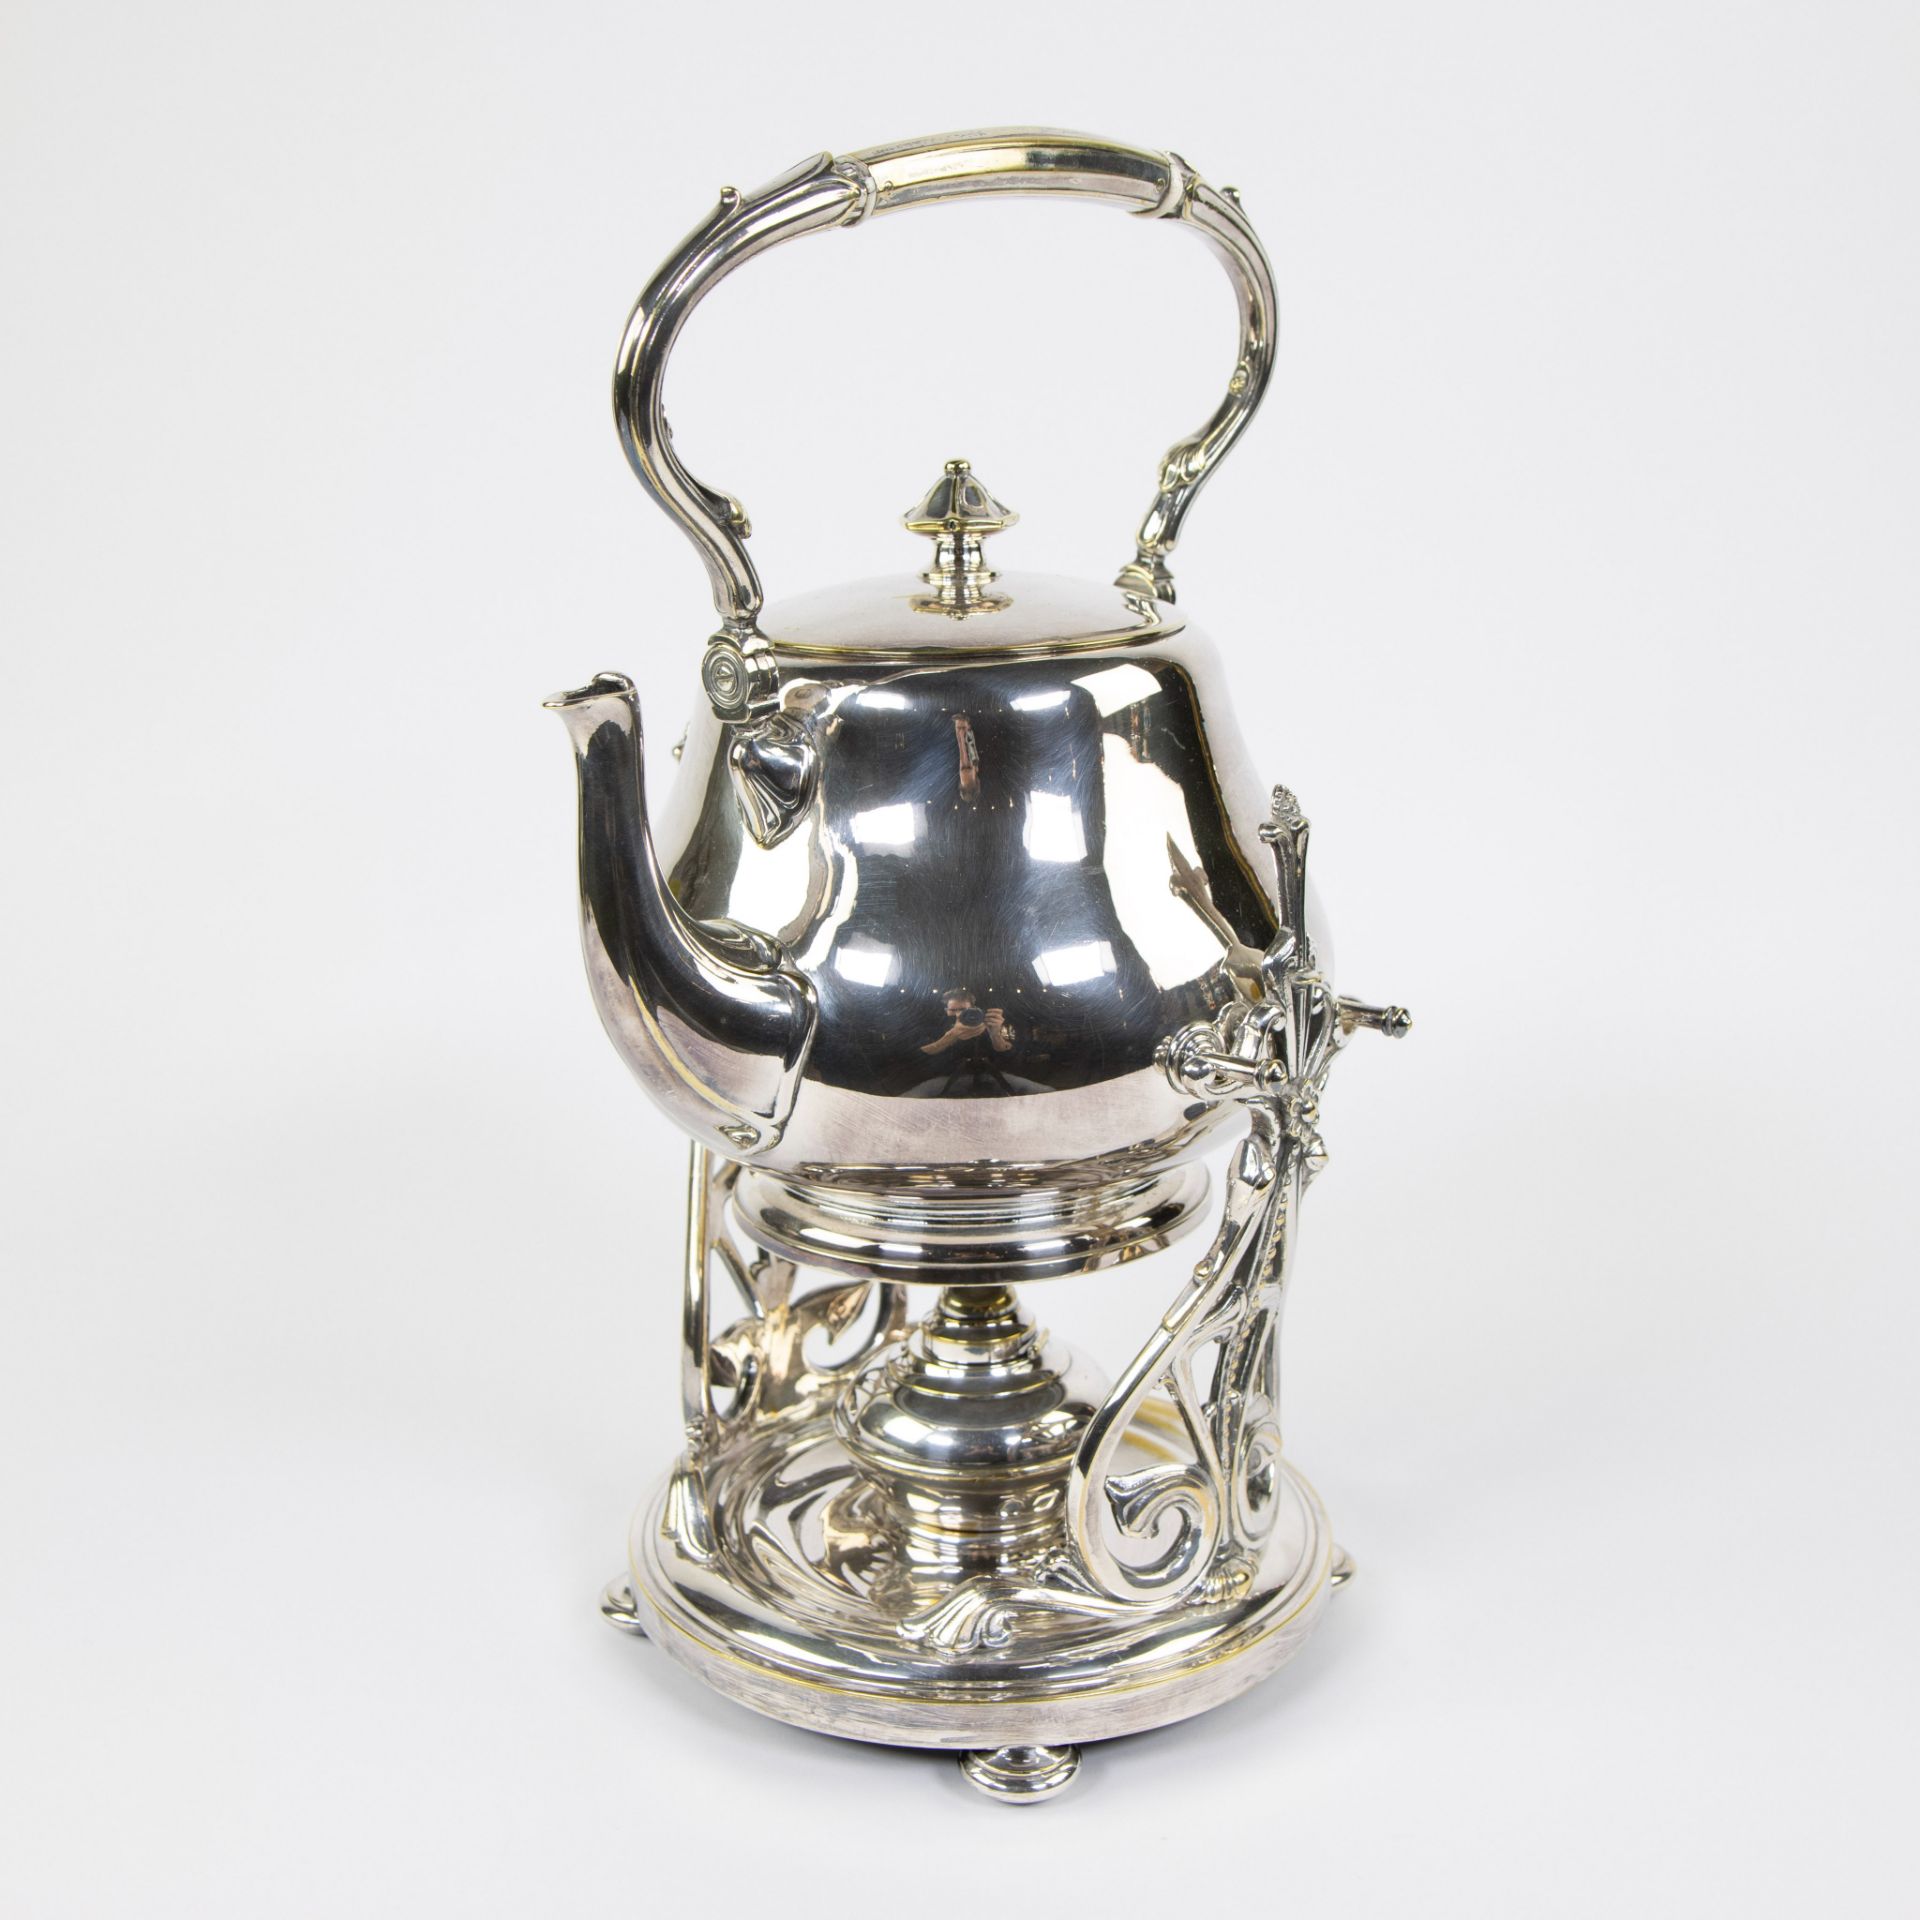 Christofle silver plated teapot on stove